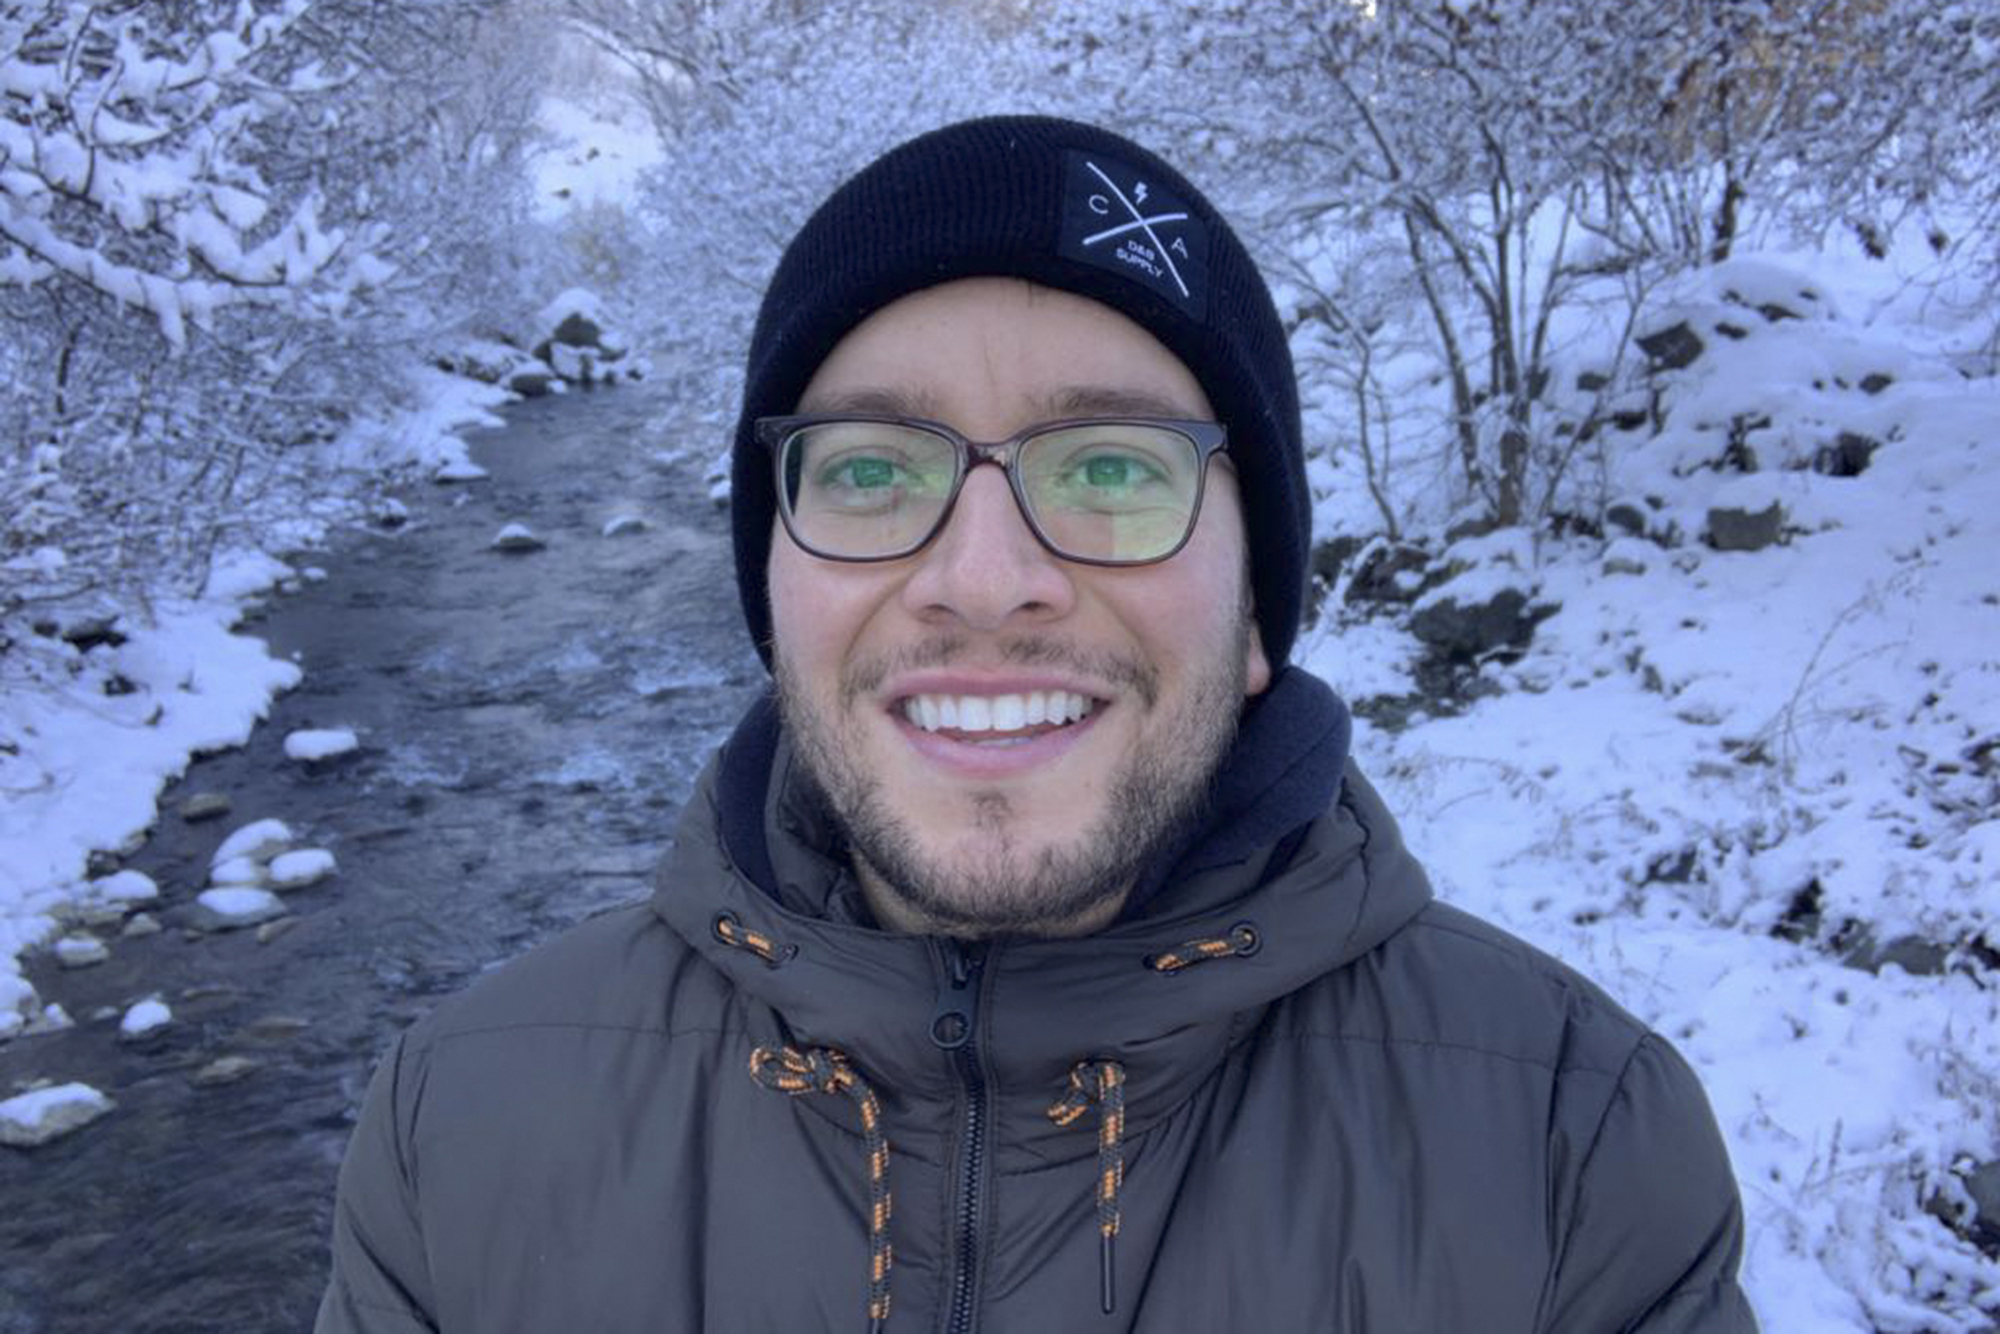 A person with short facial hair and glasses is photographed outdoors near a stream flowing through snowy terrain.